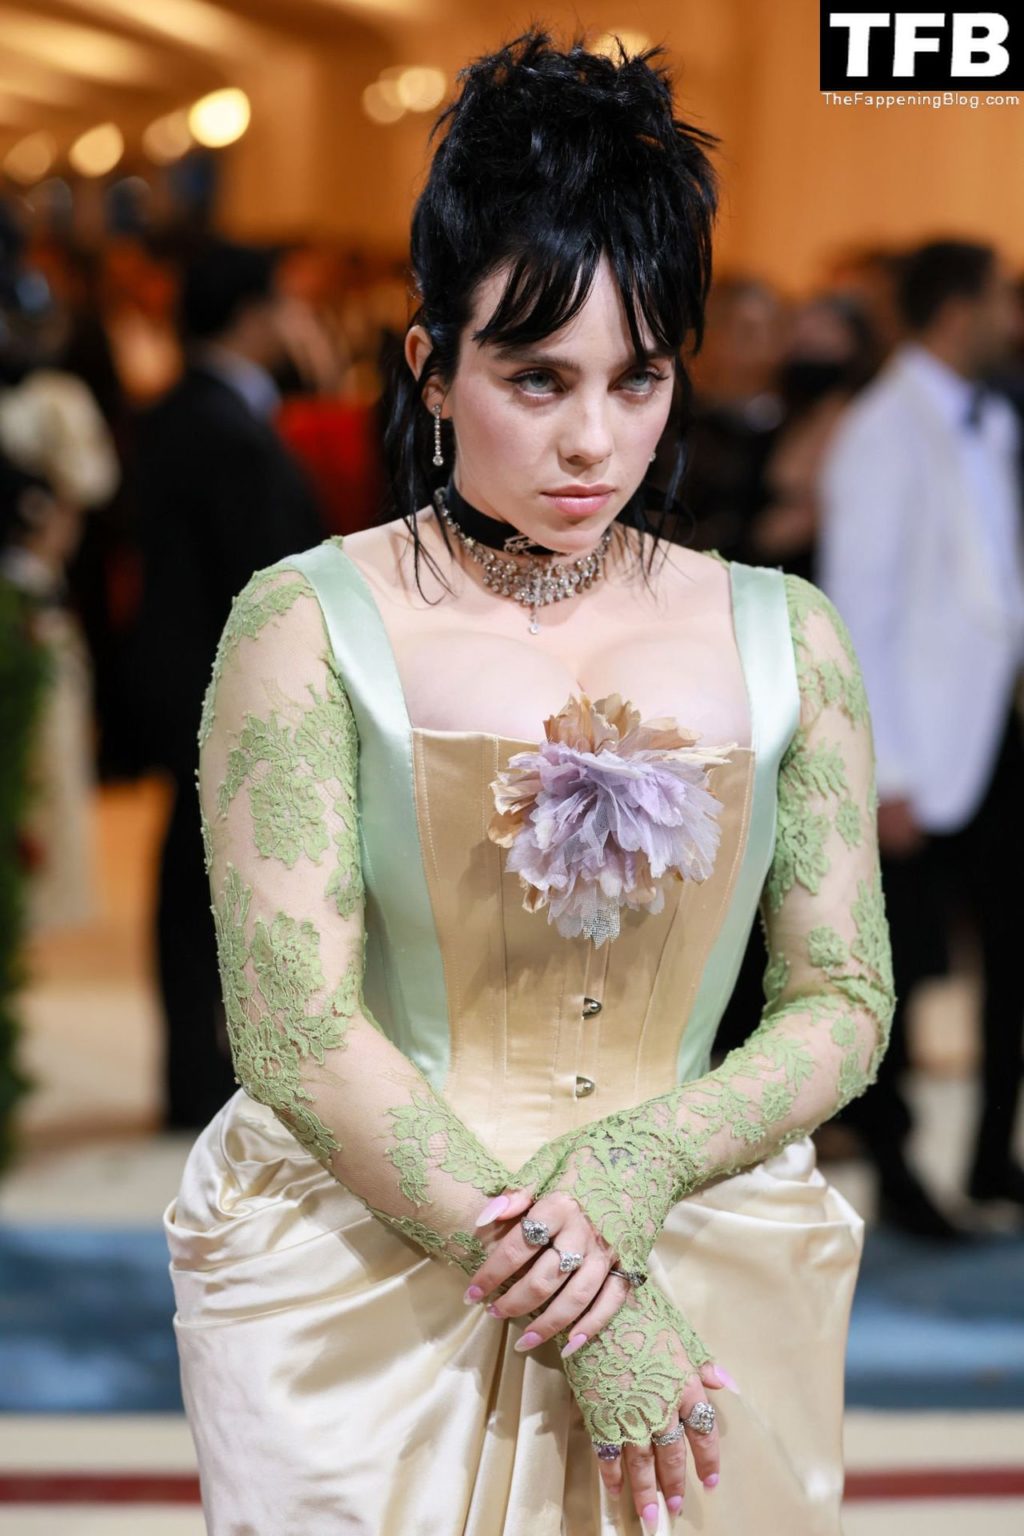 Billie Eilish Sexy The Fappening Blog 64 1024x1536 - Billie Eilish Showcases Nice Cleavage at The 2022 Met Gala in NYC (155 Photos)